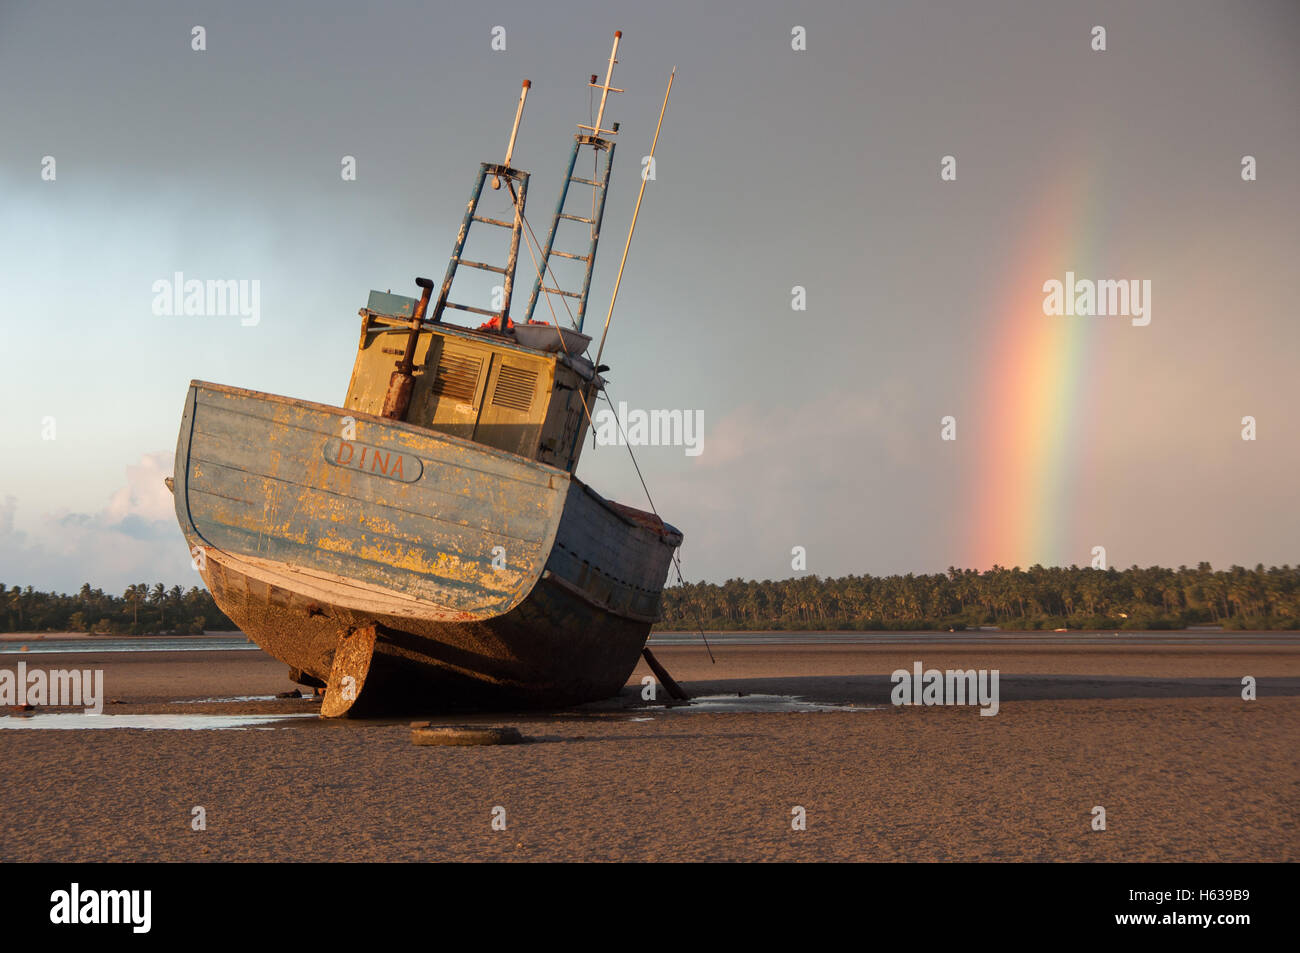 A photo of a disused vessel at low tide, captured in the foreground of a late afternoon thunderstorm, Inhambane Mozambique. Stock Photo